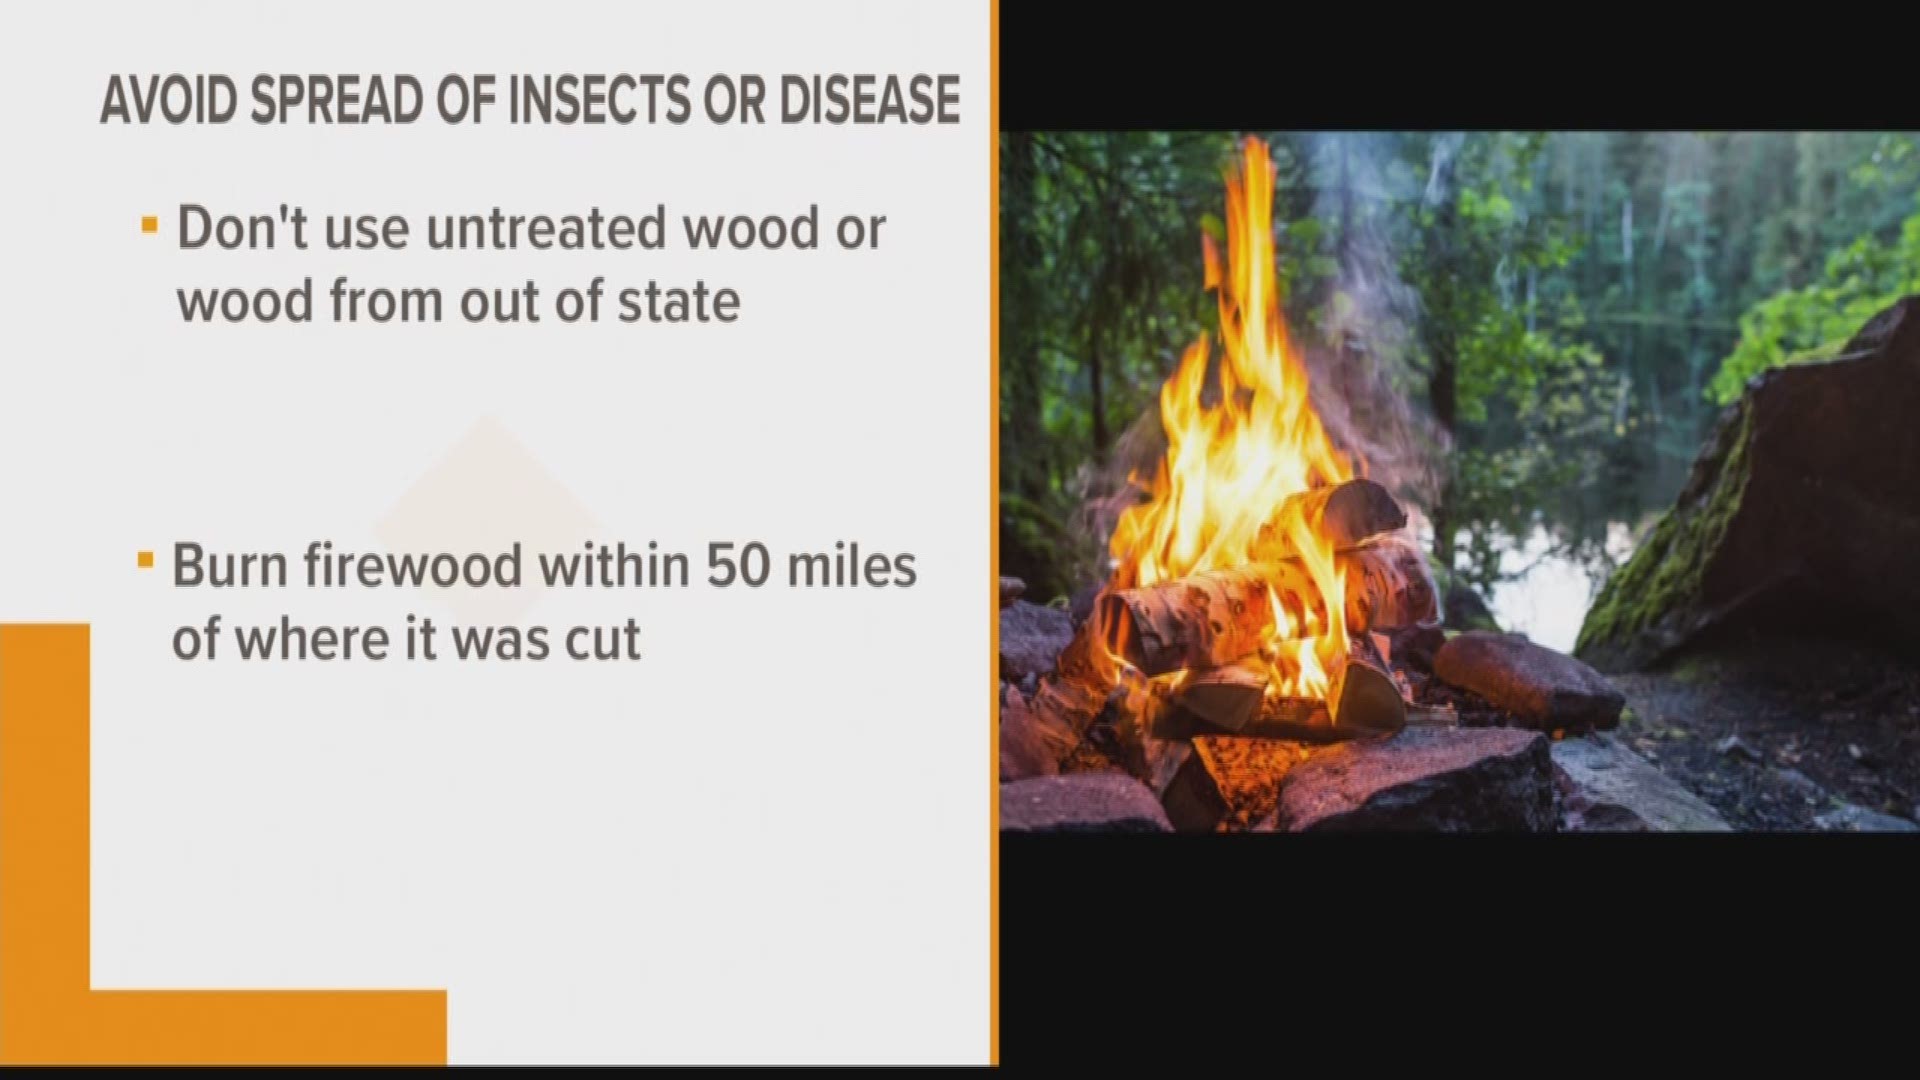 Experts say to use local firewood so that invasive forest insects and diseases don't spread. They recommend burning firewood within fifty miles of where it was harvested.